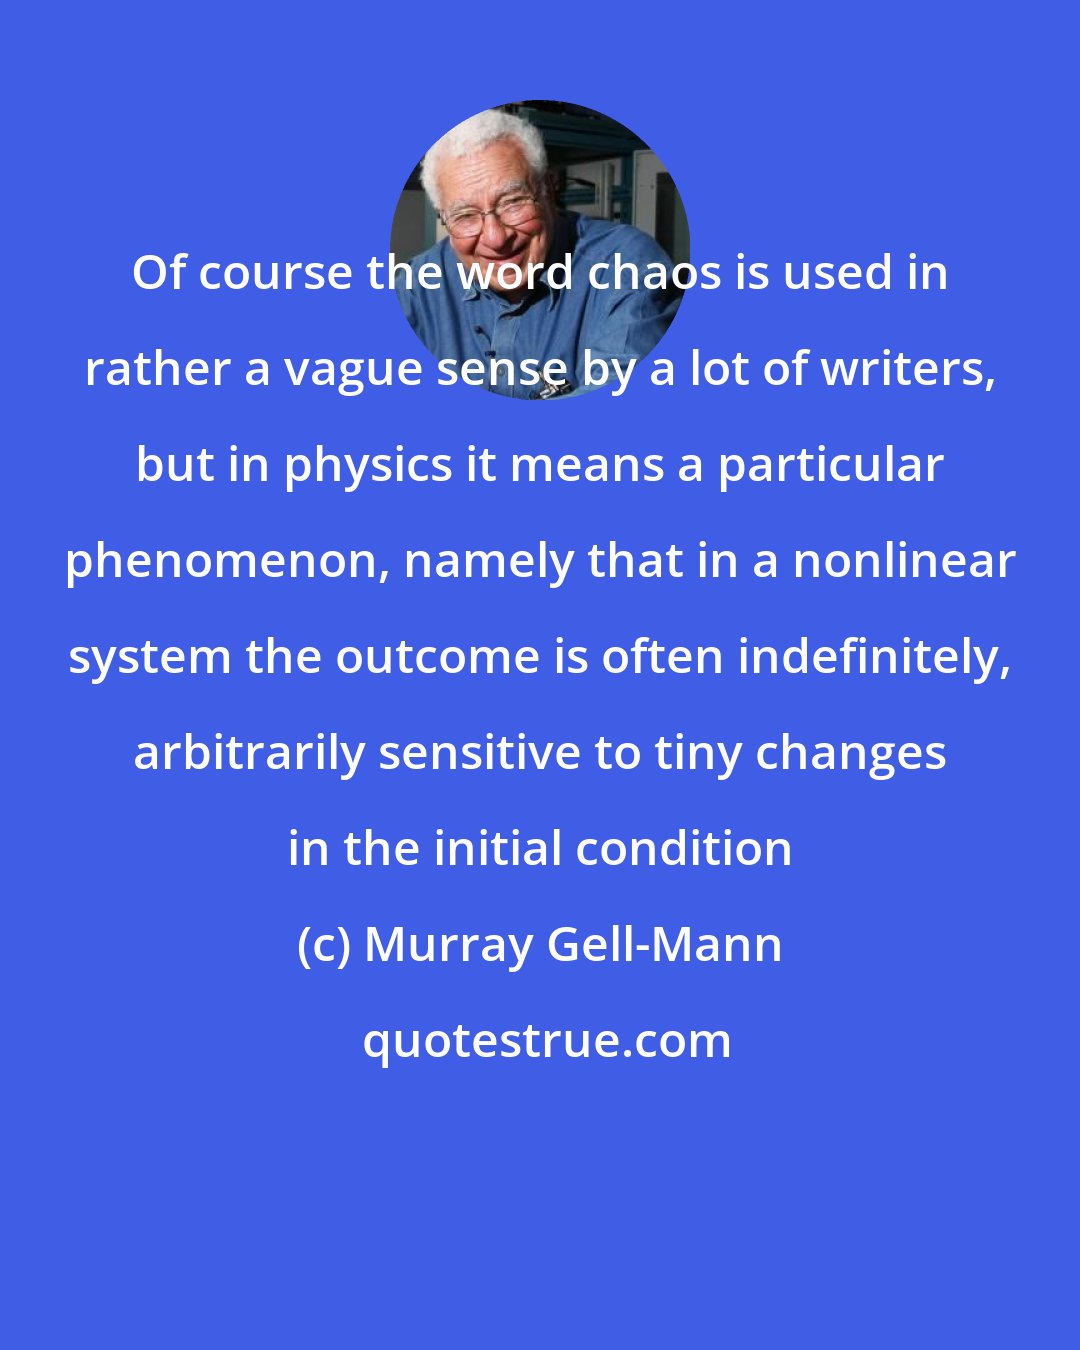 Murray Gell-Mann: Of course the word chaos is used in rather a vague sense by a lot of writers, but in physics it means a particular phenomenon, namely that in a nonlinear system the outcome is often indefinitely, arbitrarily sensitive to tiny changes in the initial condition